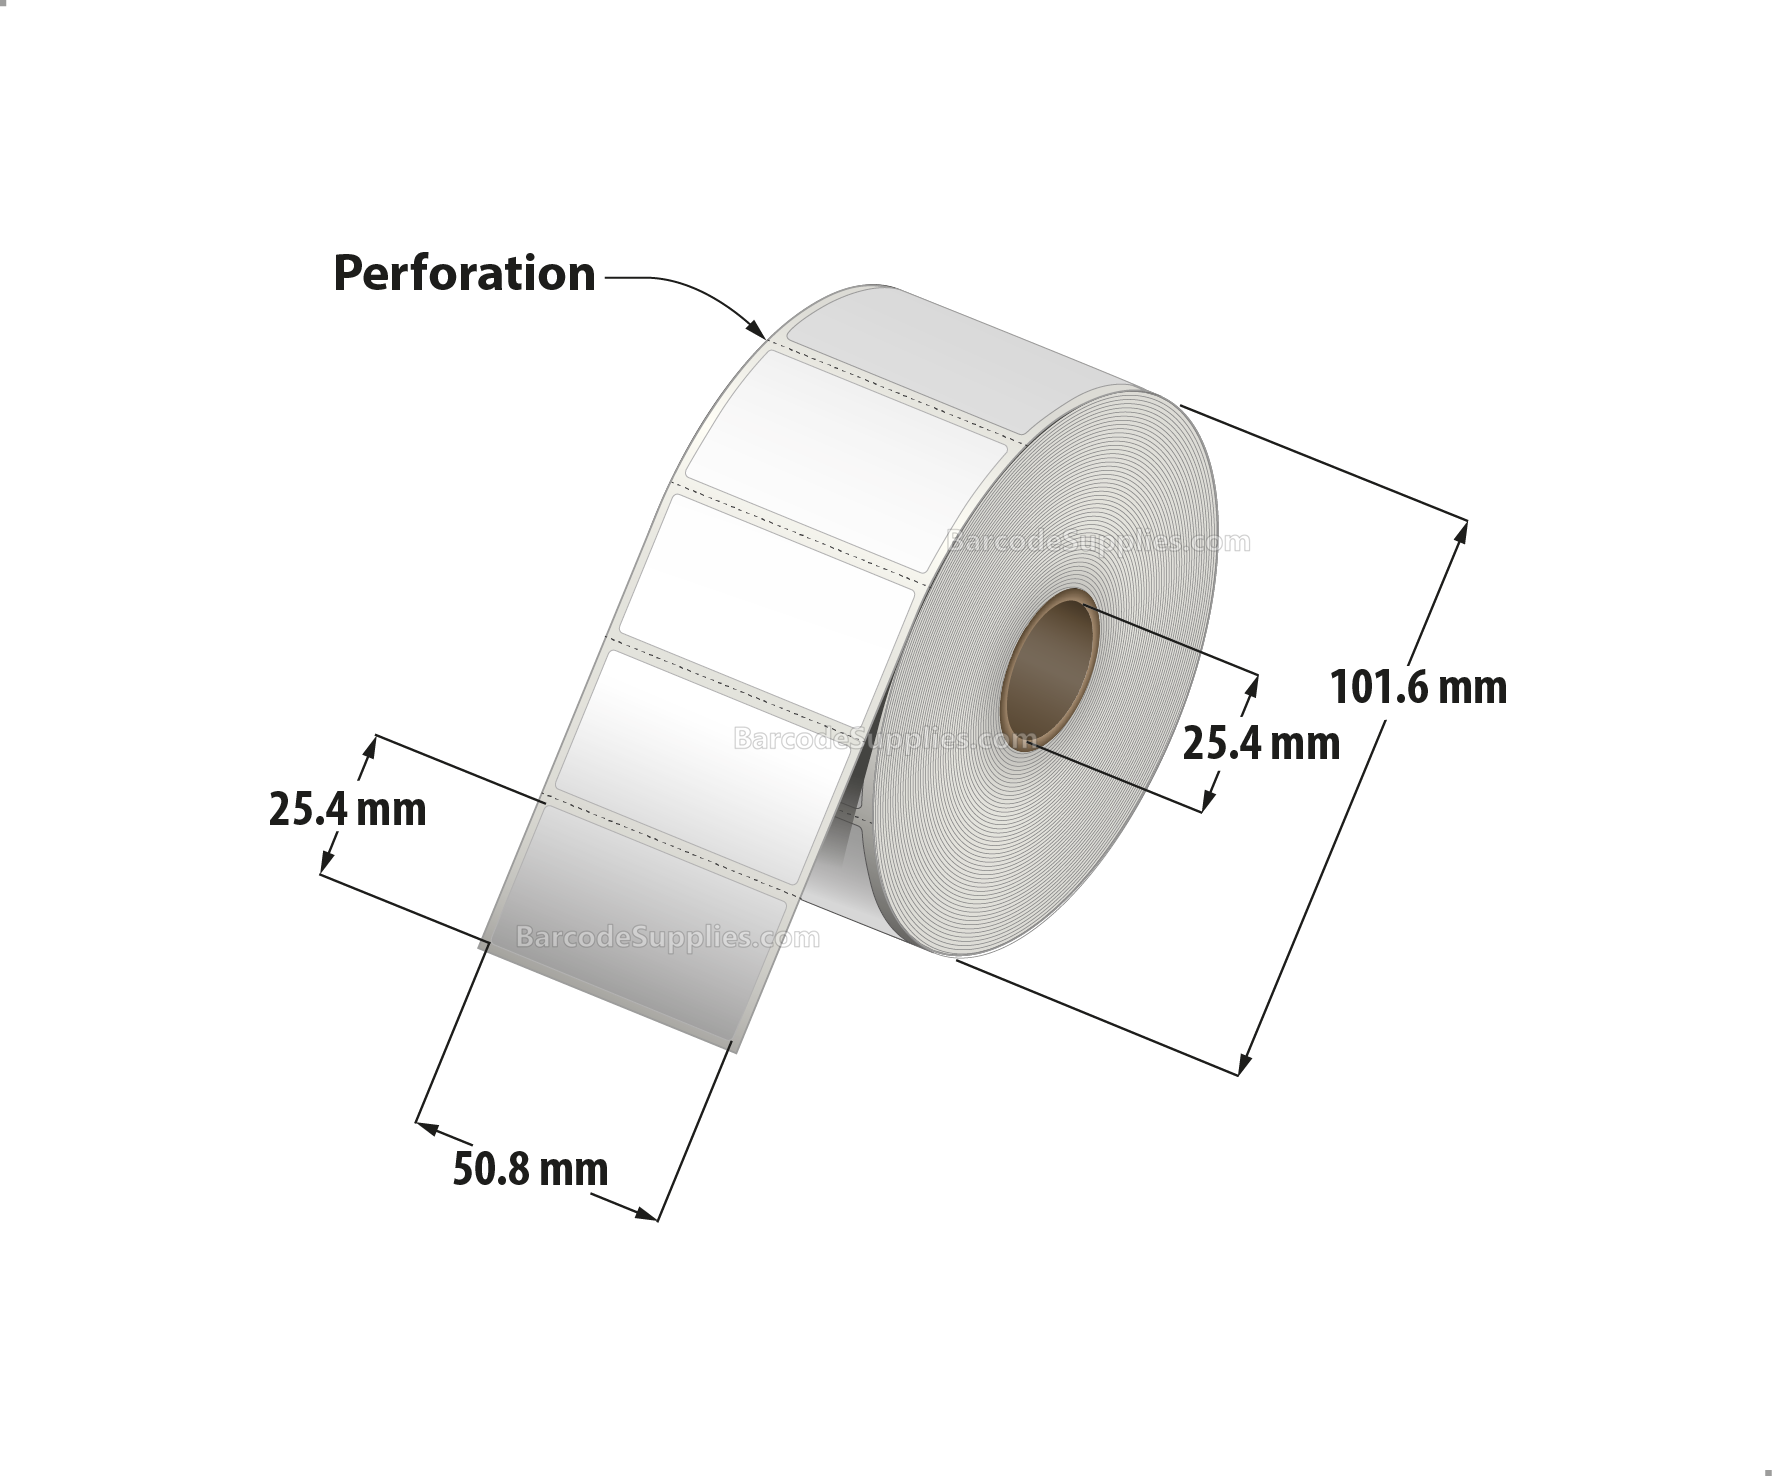 2 x 1 Direct Thermal White Labels With Rubber Adhesive - Perforated - 1310 Labels Per Roll - Carton Of 12 Rolls - 15720 Labels Total - MPN: RDT4-200100-1P